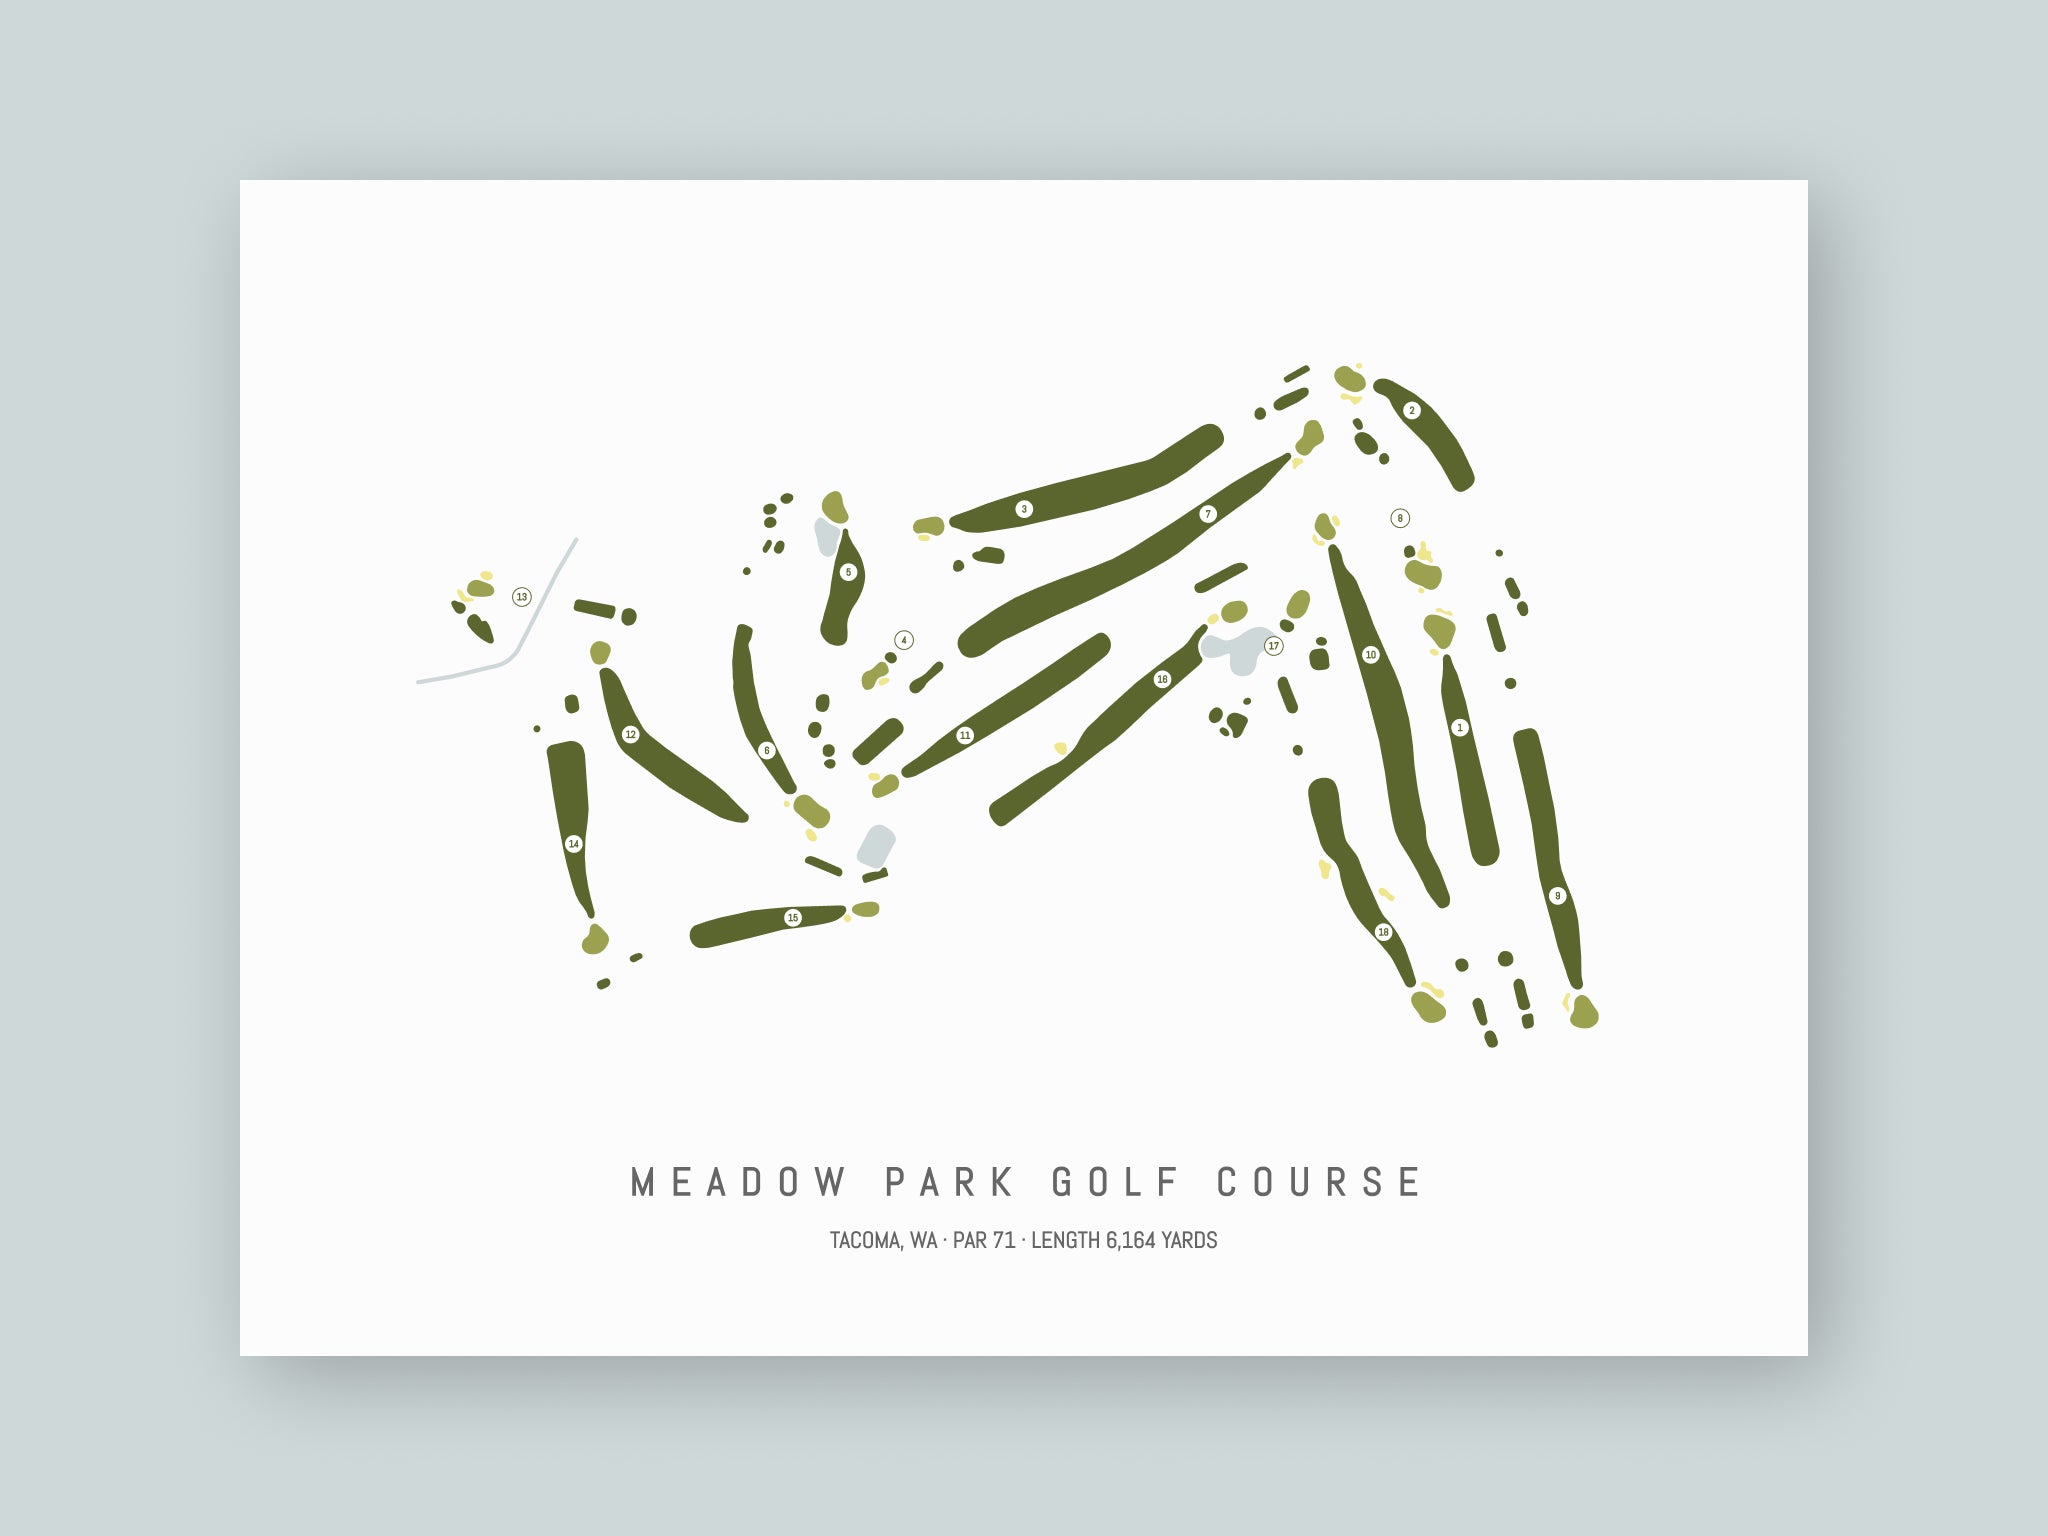 Meadow-Park-Golf-Course-WA--Unframed-24x18-With-Hole-Numbers